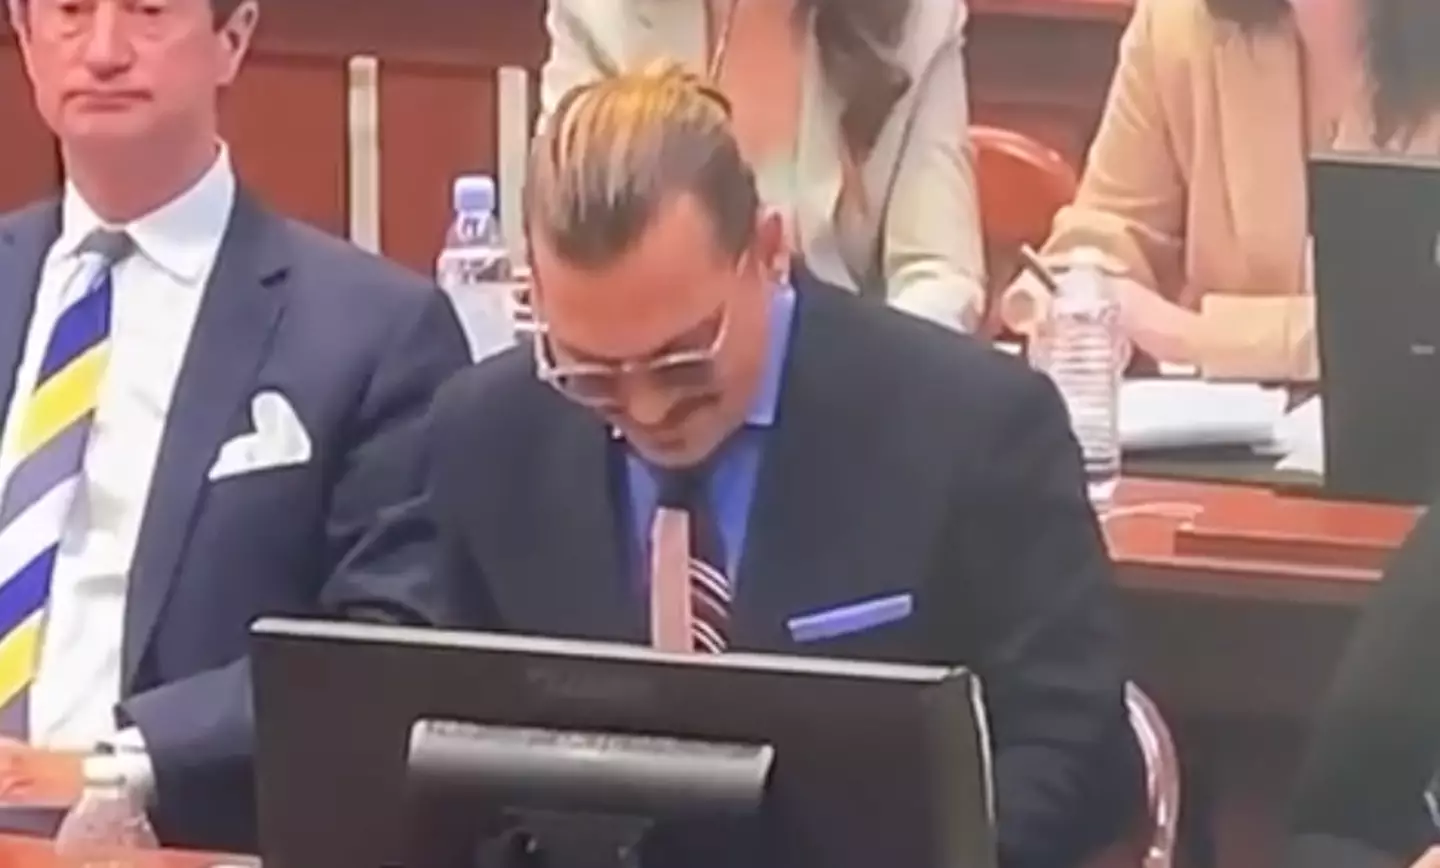 Johnny Depp could be seen laughing as Heard talked about his breath.